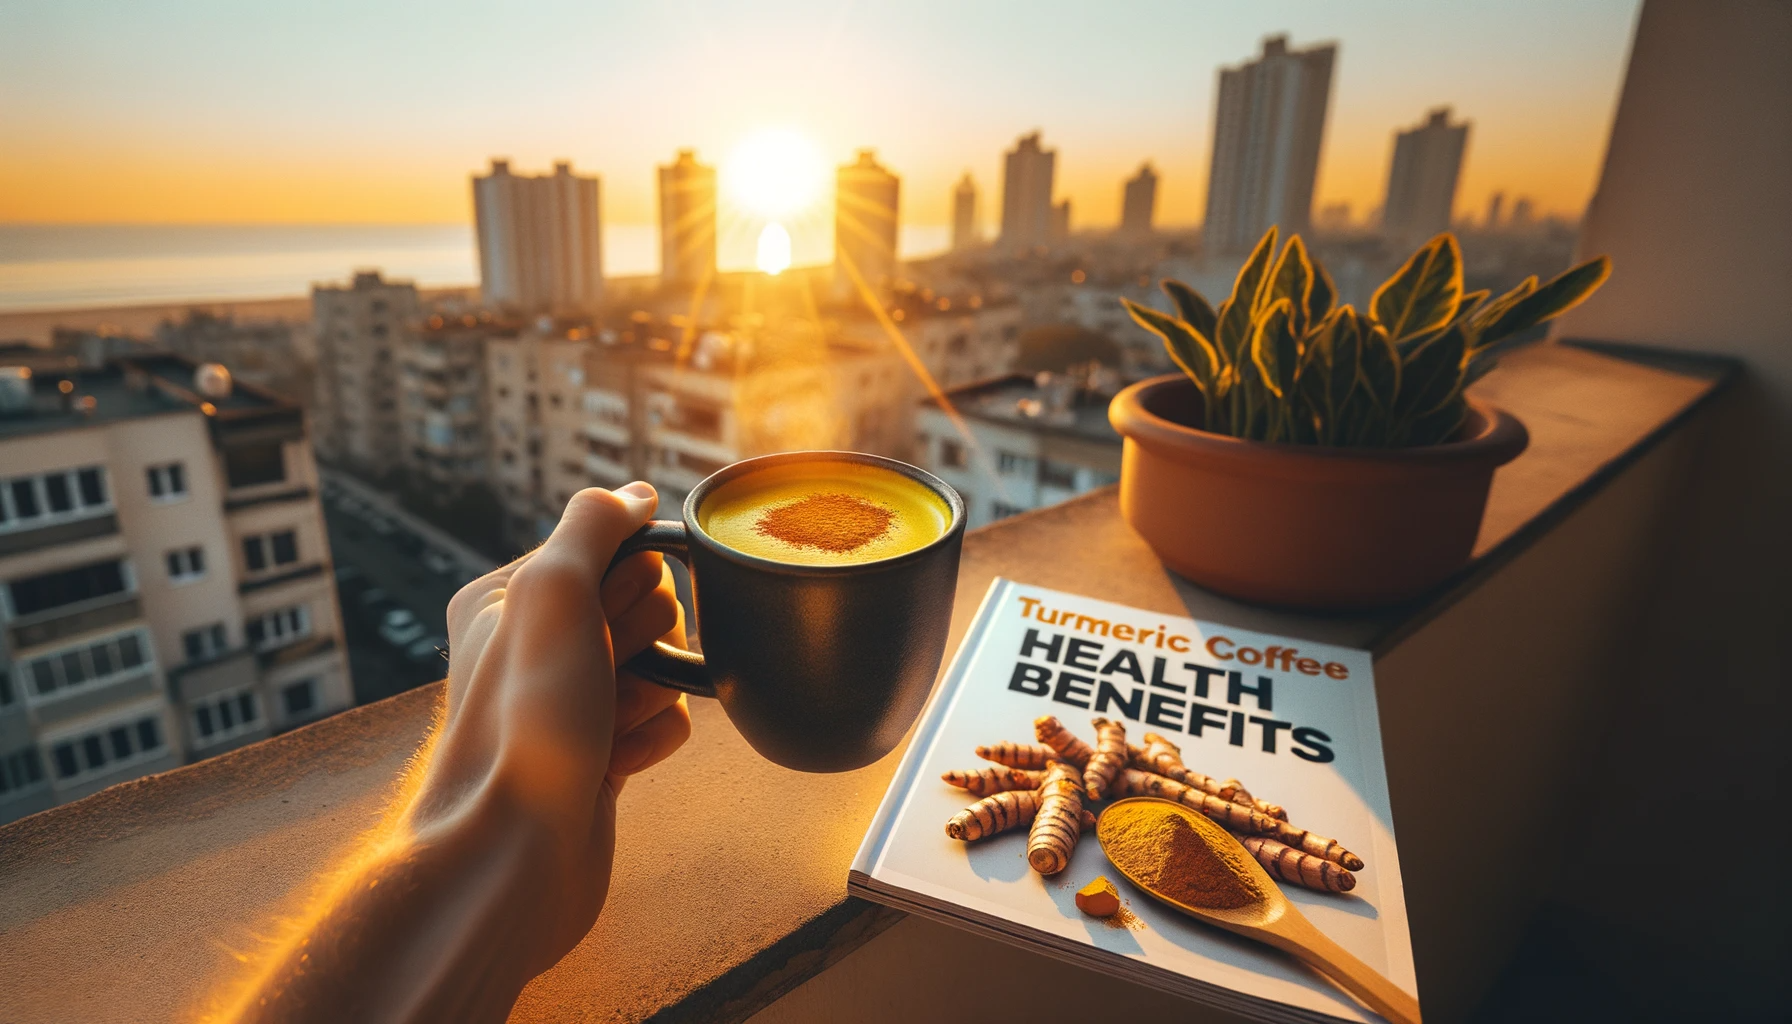 On a balcony, as the sun rises, an individual enjoys their turmeric coffee. A magazine titled 'HEALTH Benefits' rests beside them, emphasizing the drink's health advantages and the promise of a wholesome day ahead.